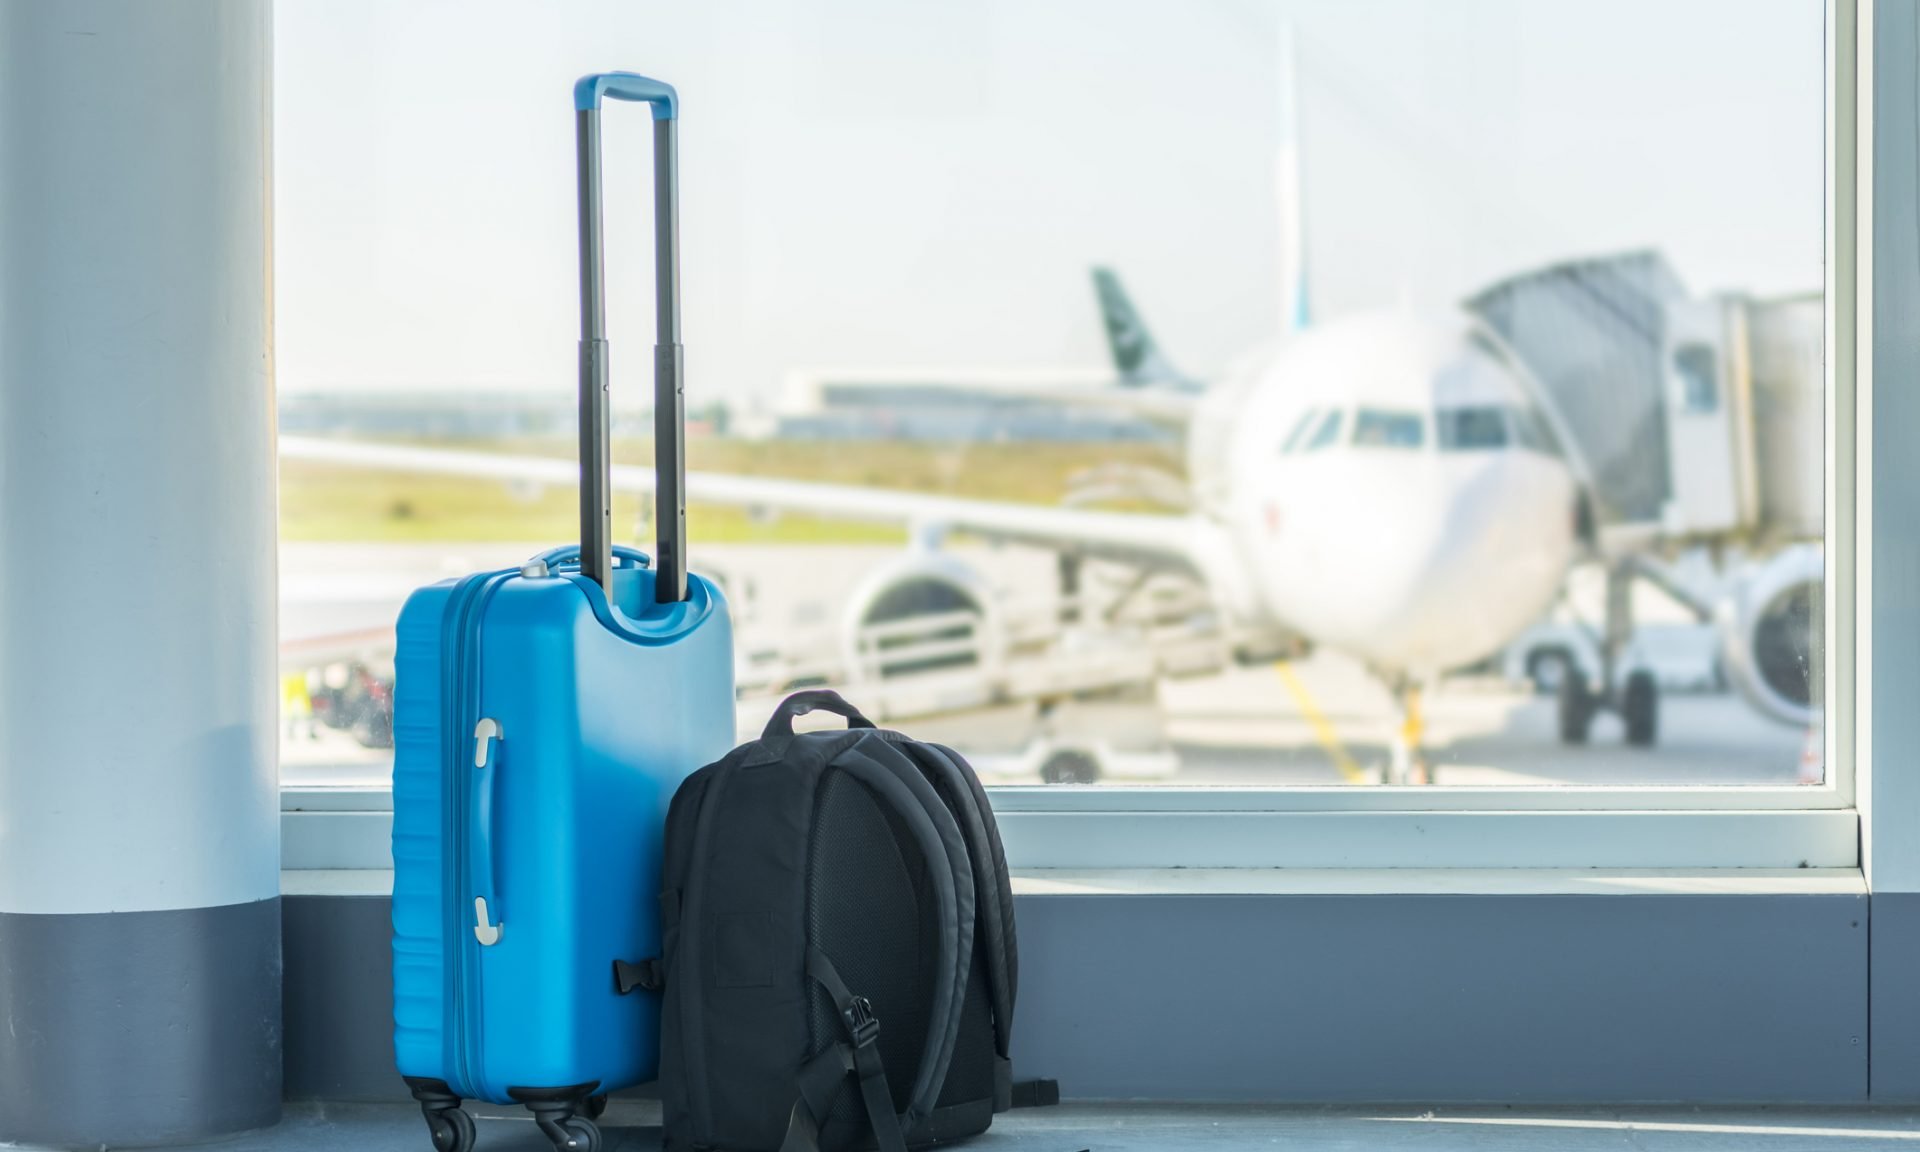 Guide: How To Measure Luggage Size In cm And Inches